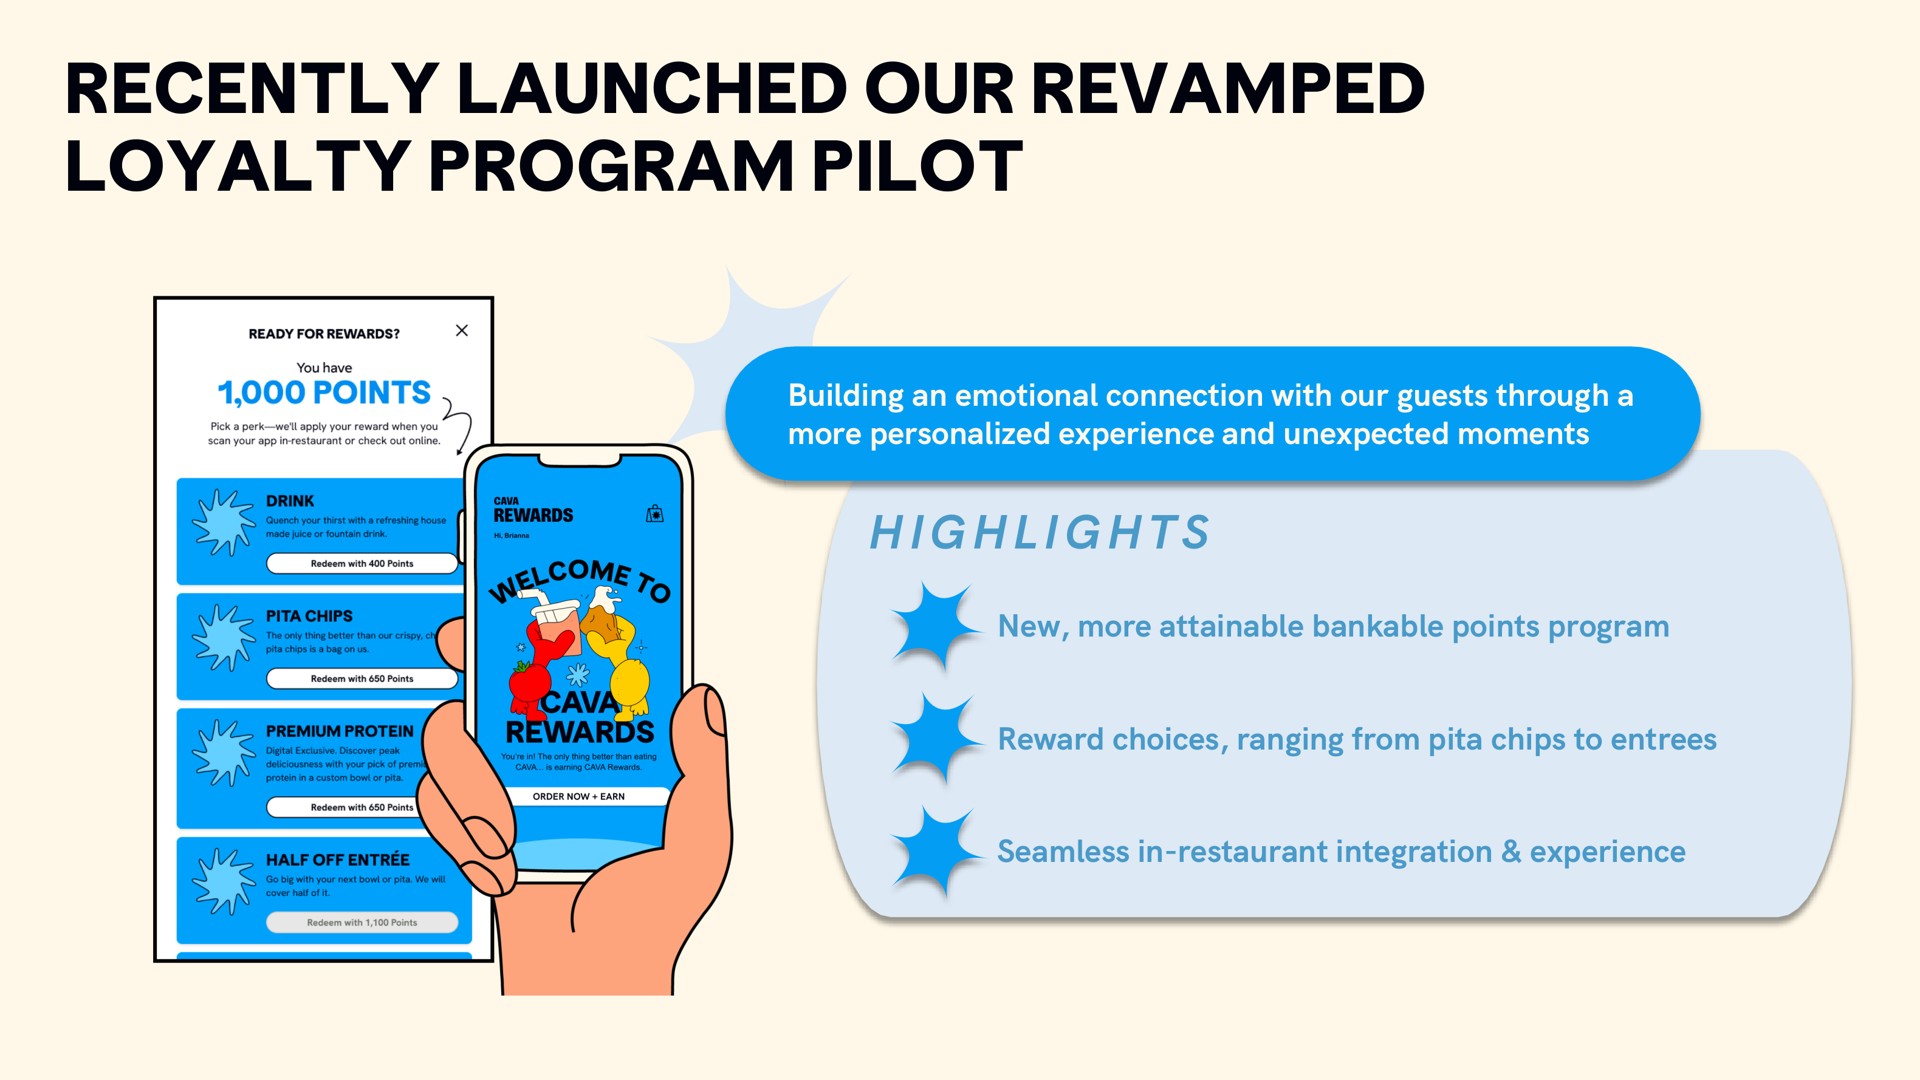 recently launched our revamped loyalty program pilot | CAVA